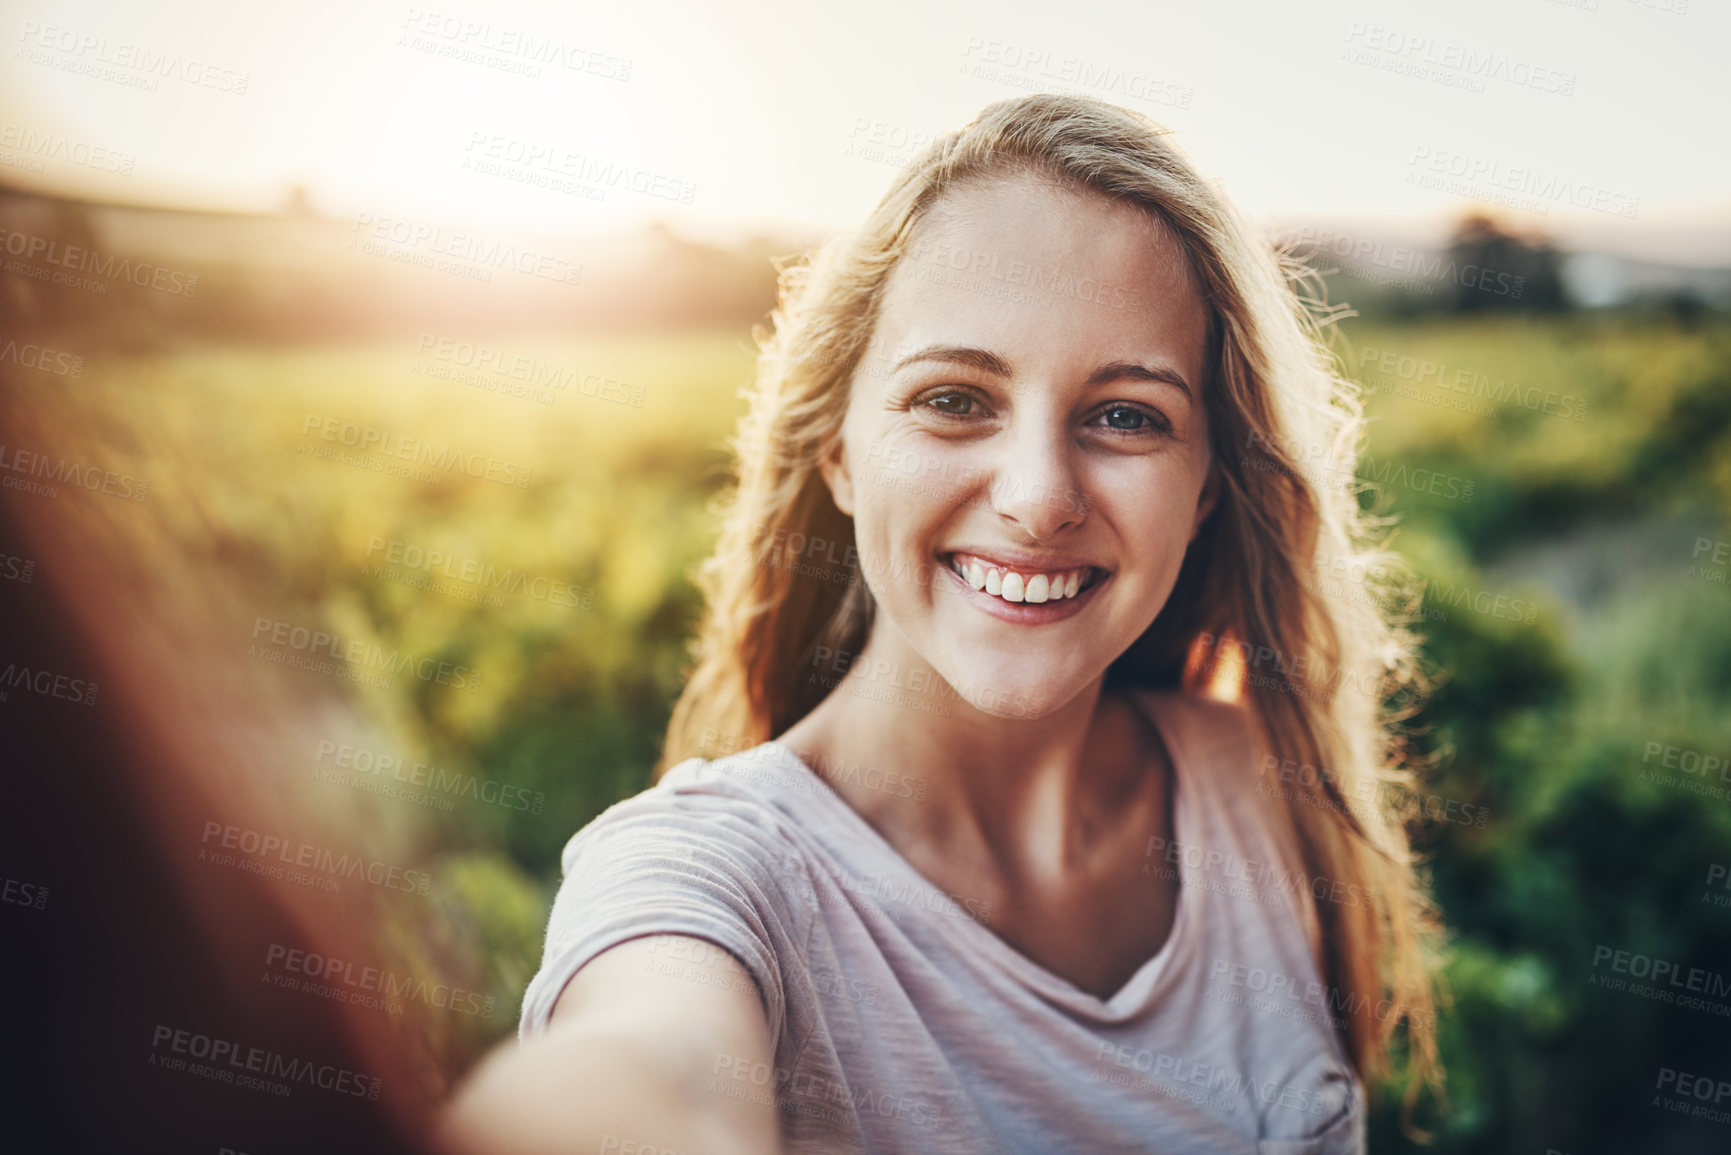 Buy stock photo Cropped portrait of a happy young woman taking a photo of herself and her farm in the background